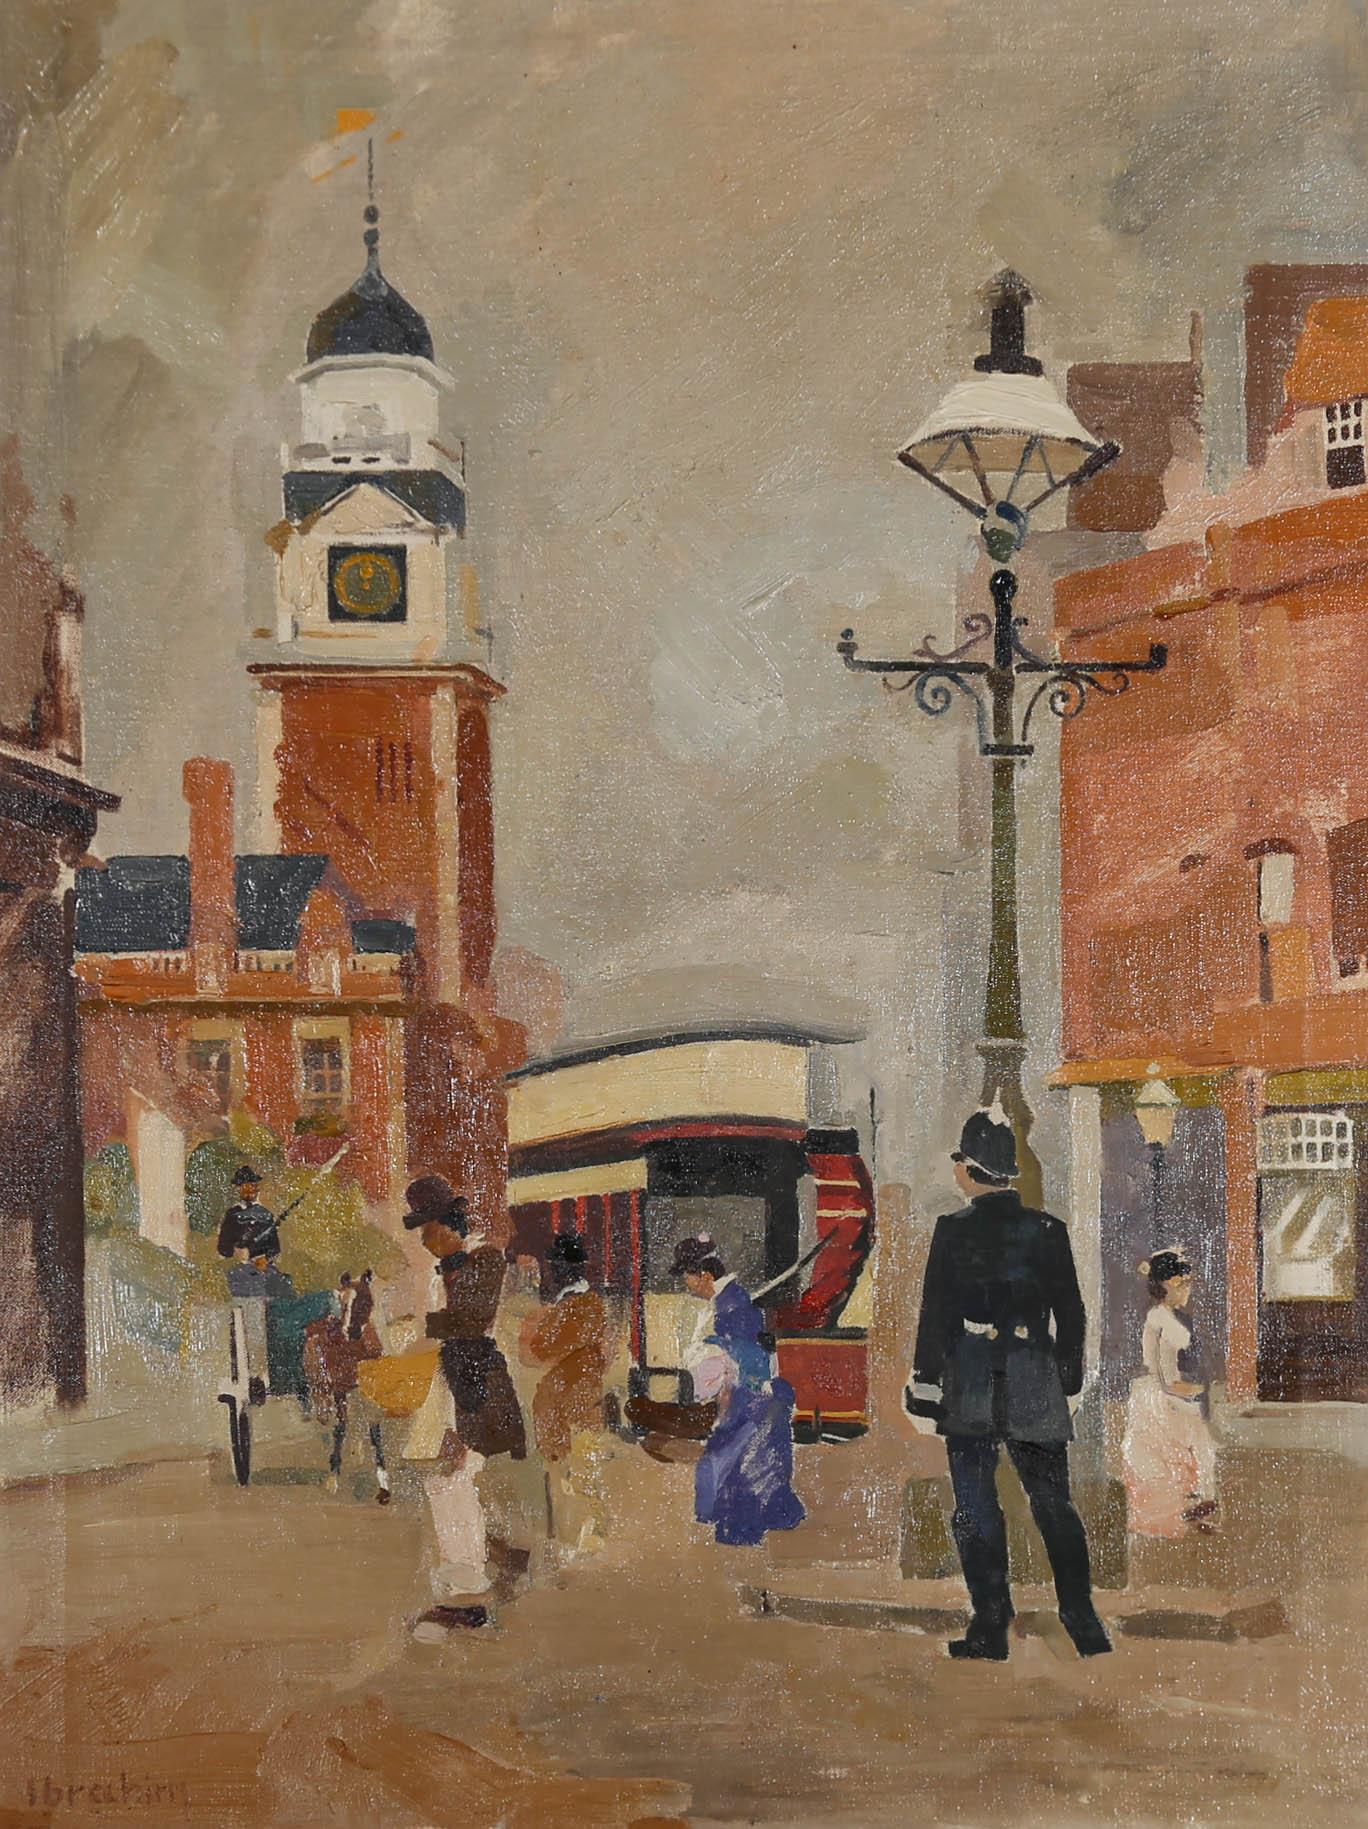 A wonderfully bright and energetic street scene, depicting Edwardian figures in the bustling big city. A bus can be seen passing a horse and cart on its way, after dropping off several passengers in this architectural quarter of the city. The